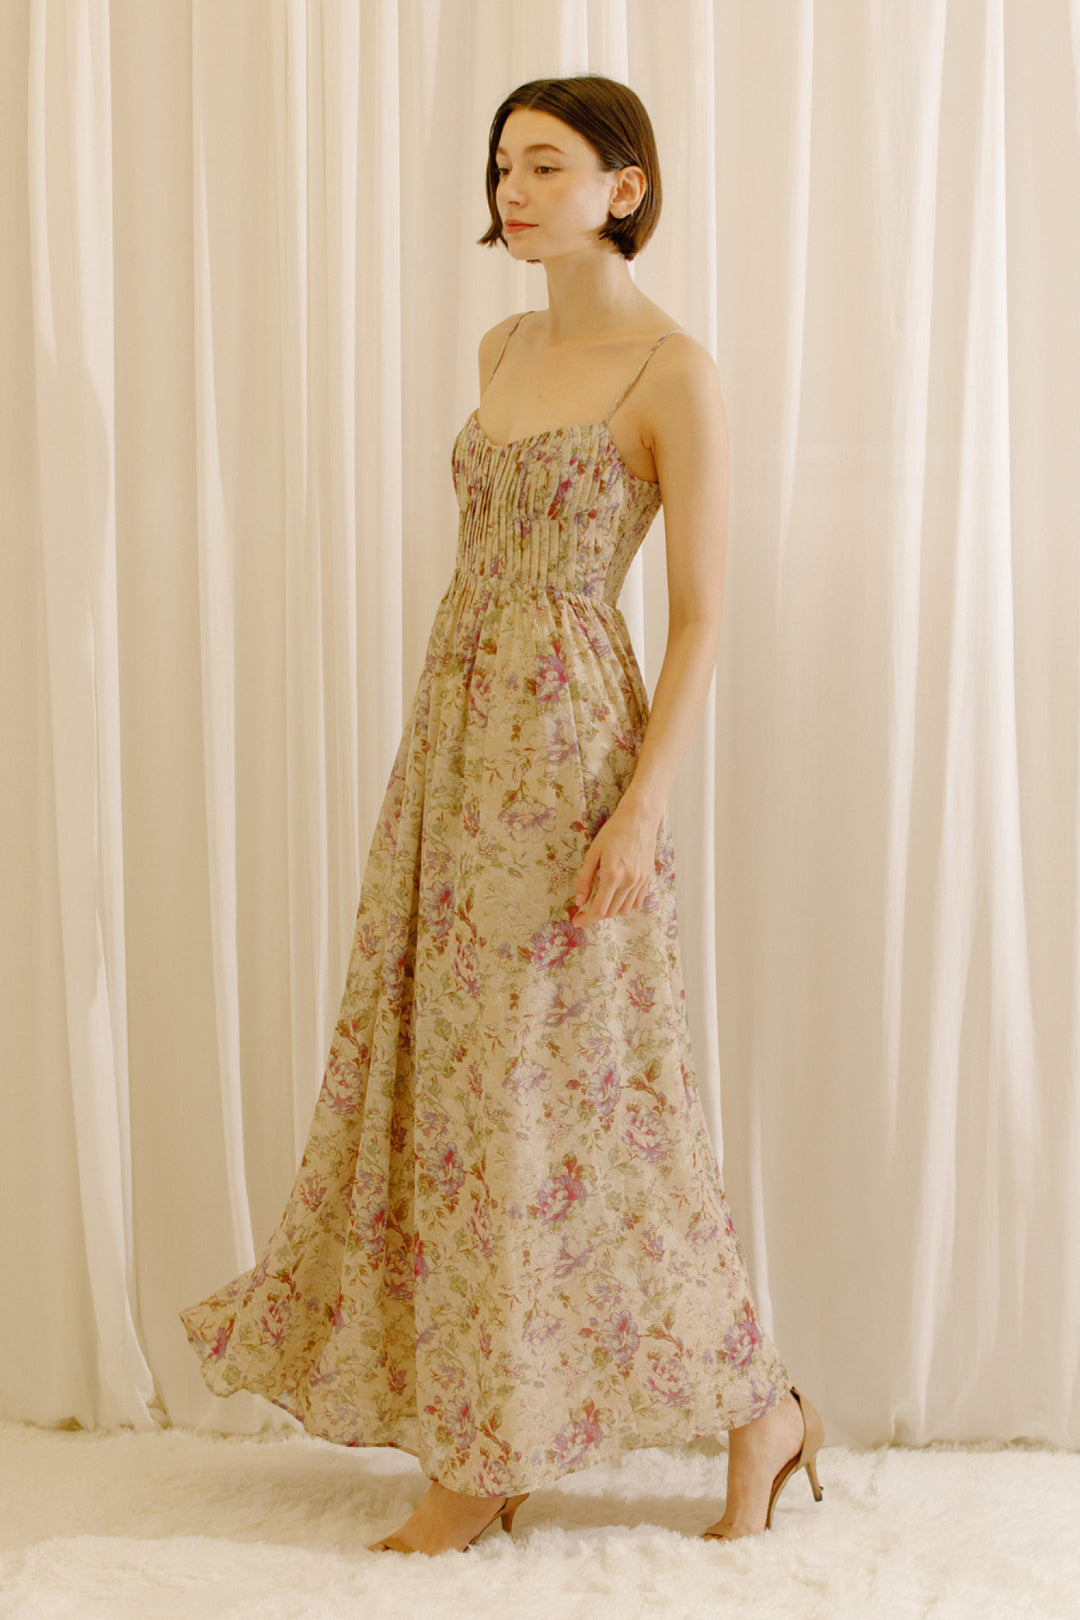 Floral pleated maxi dress.